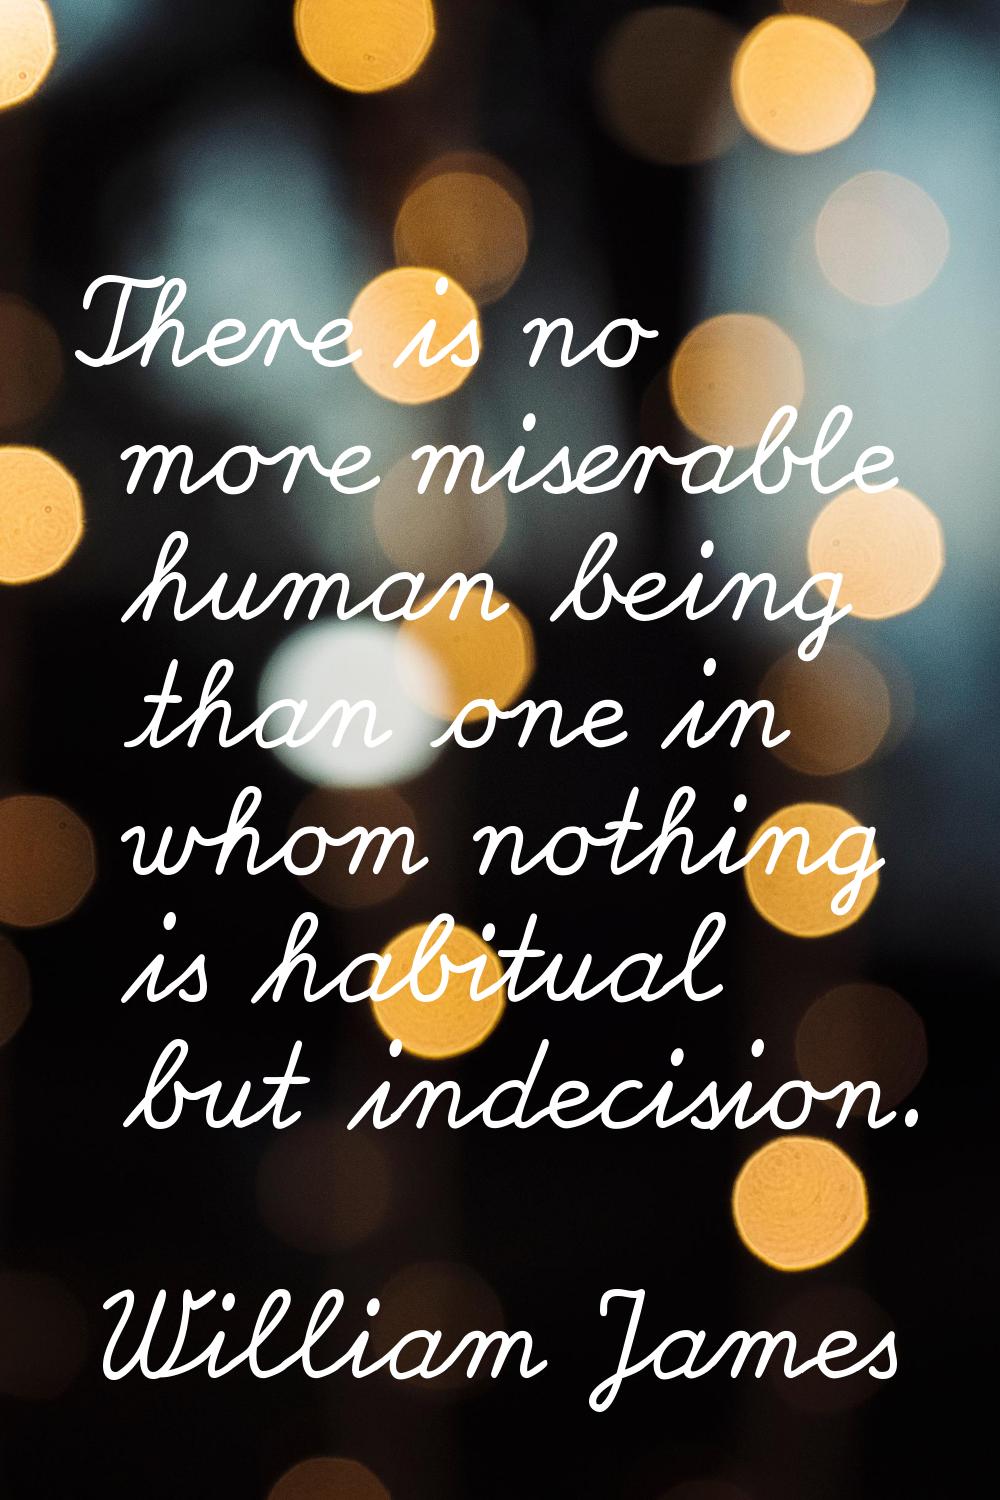 There is no more miserable human being than one in whom nothing is habitual but indecision.